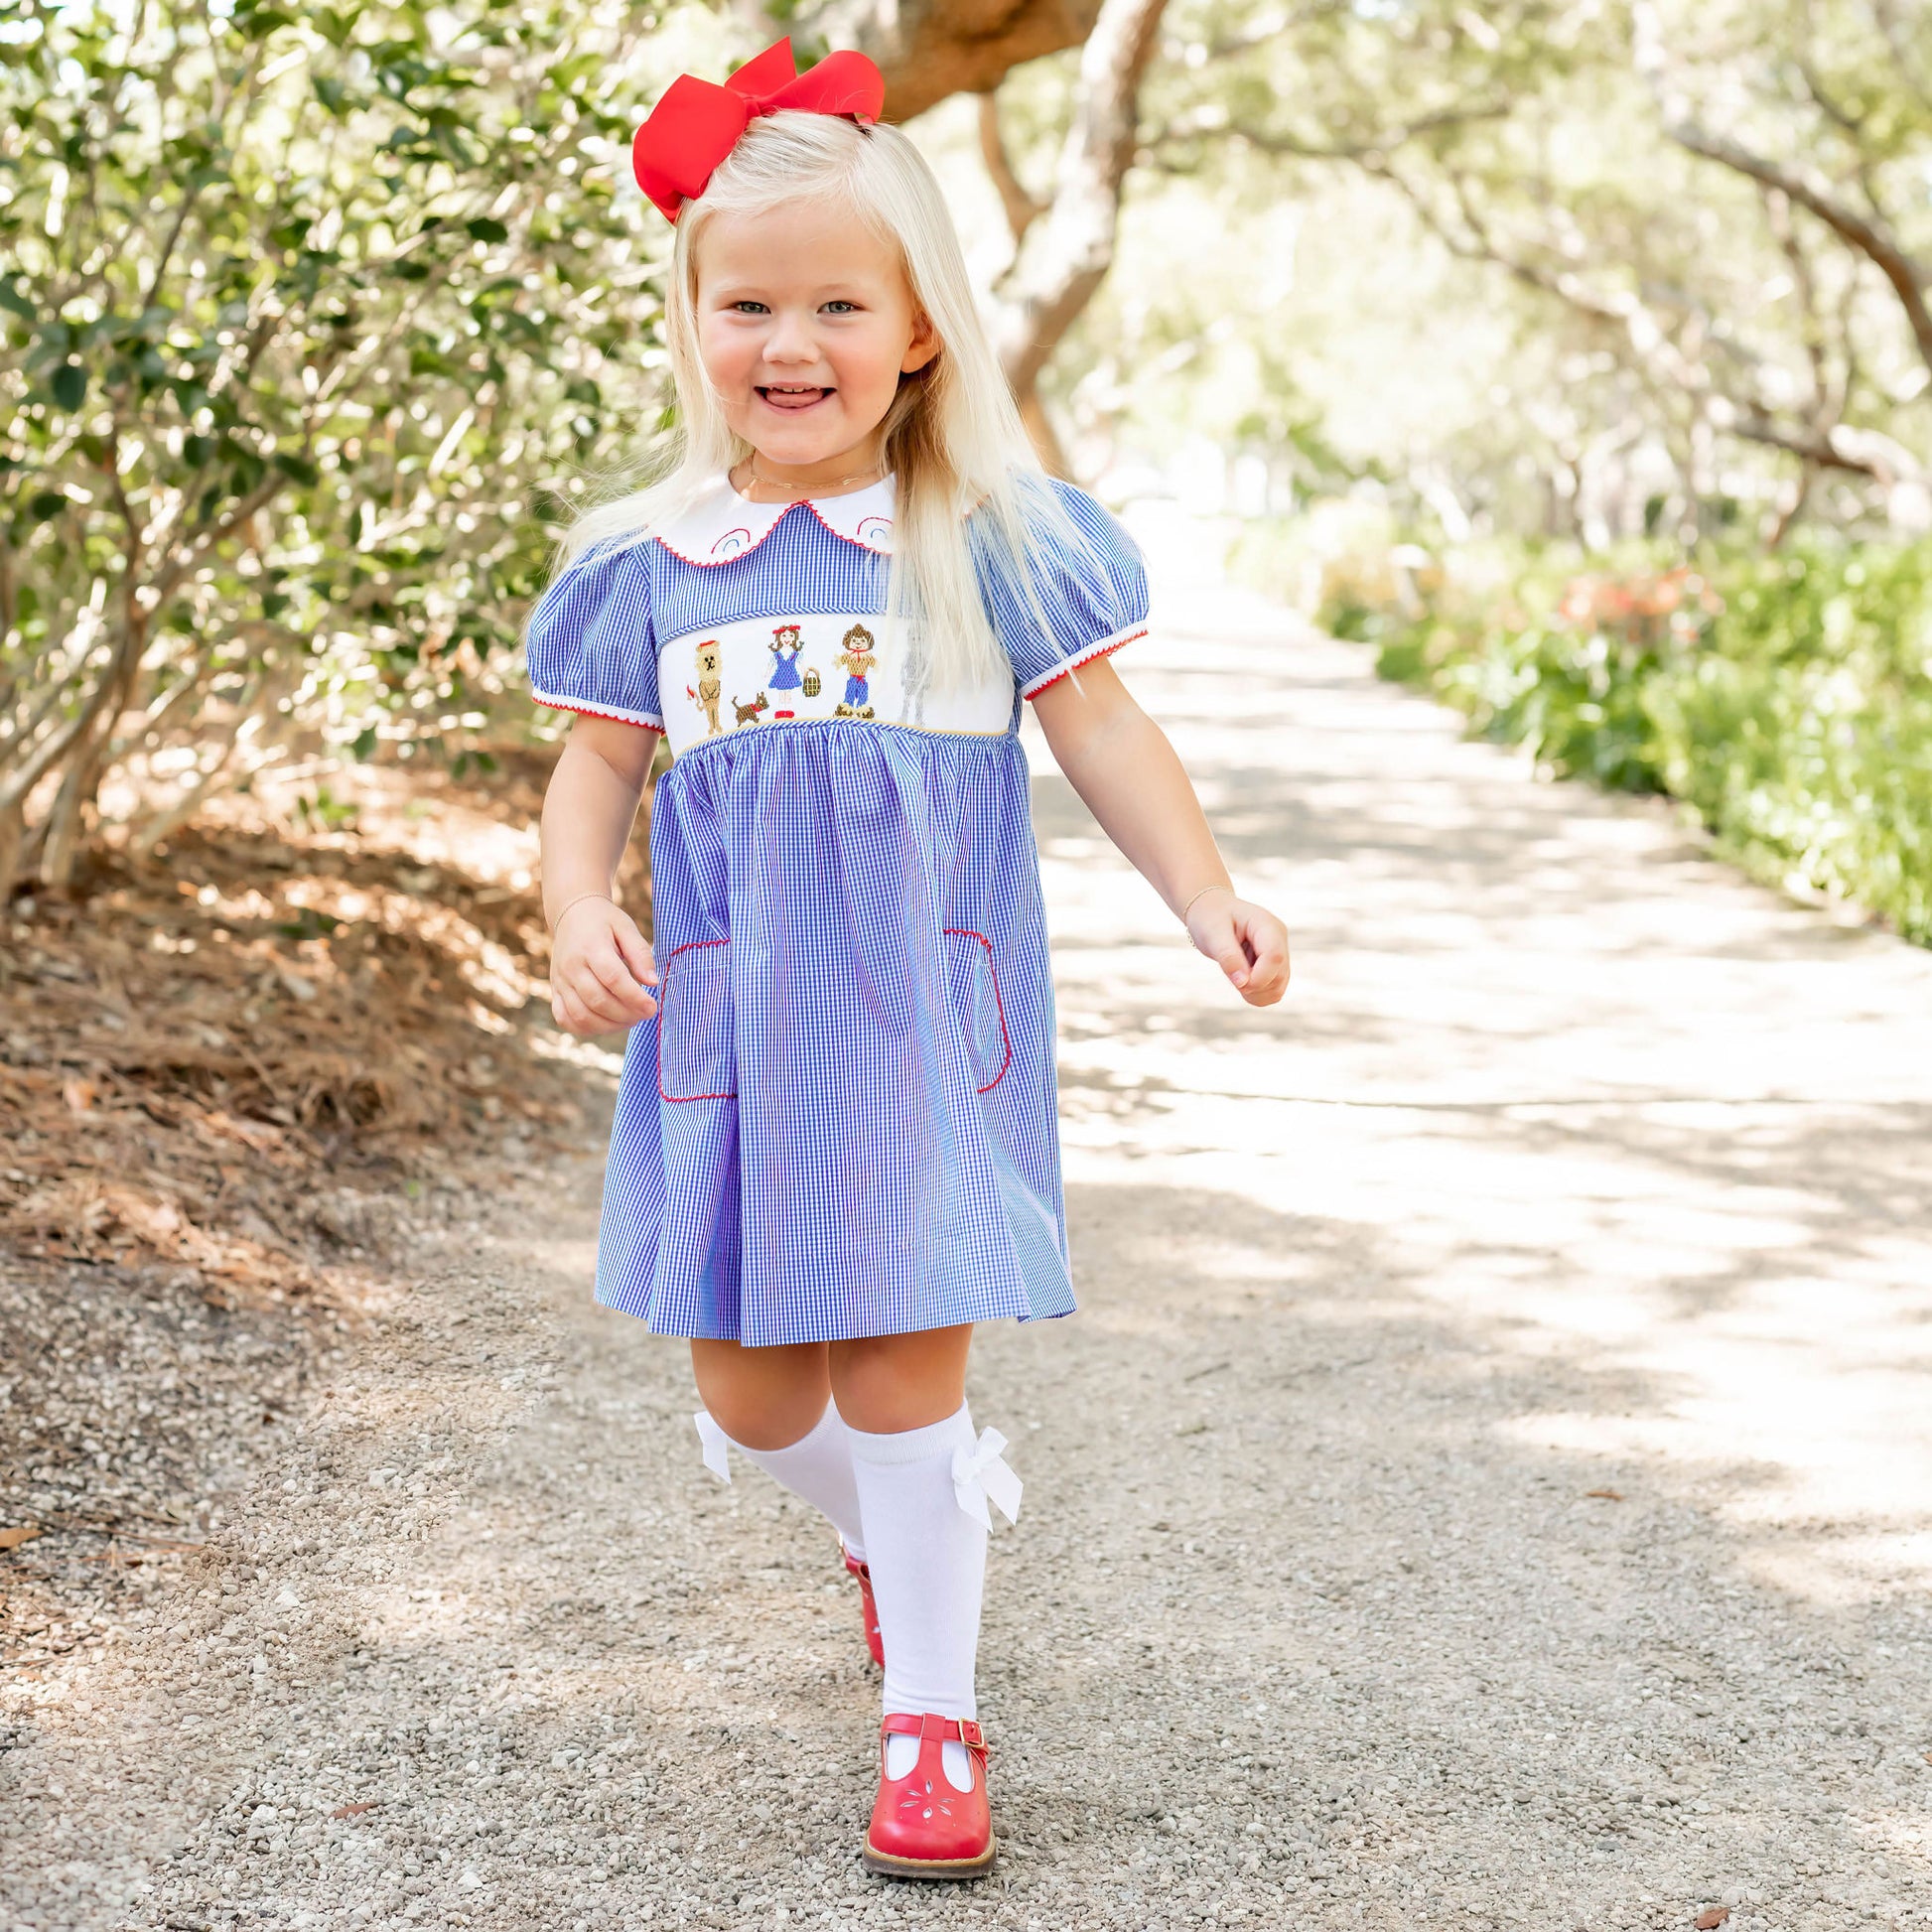 Adorable and Affordable Smocked and Boutique Clothing for Children